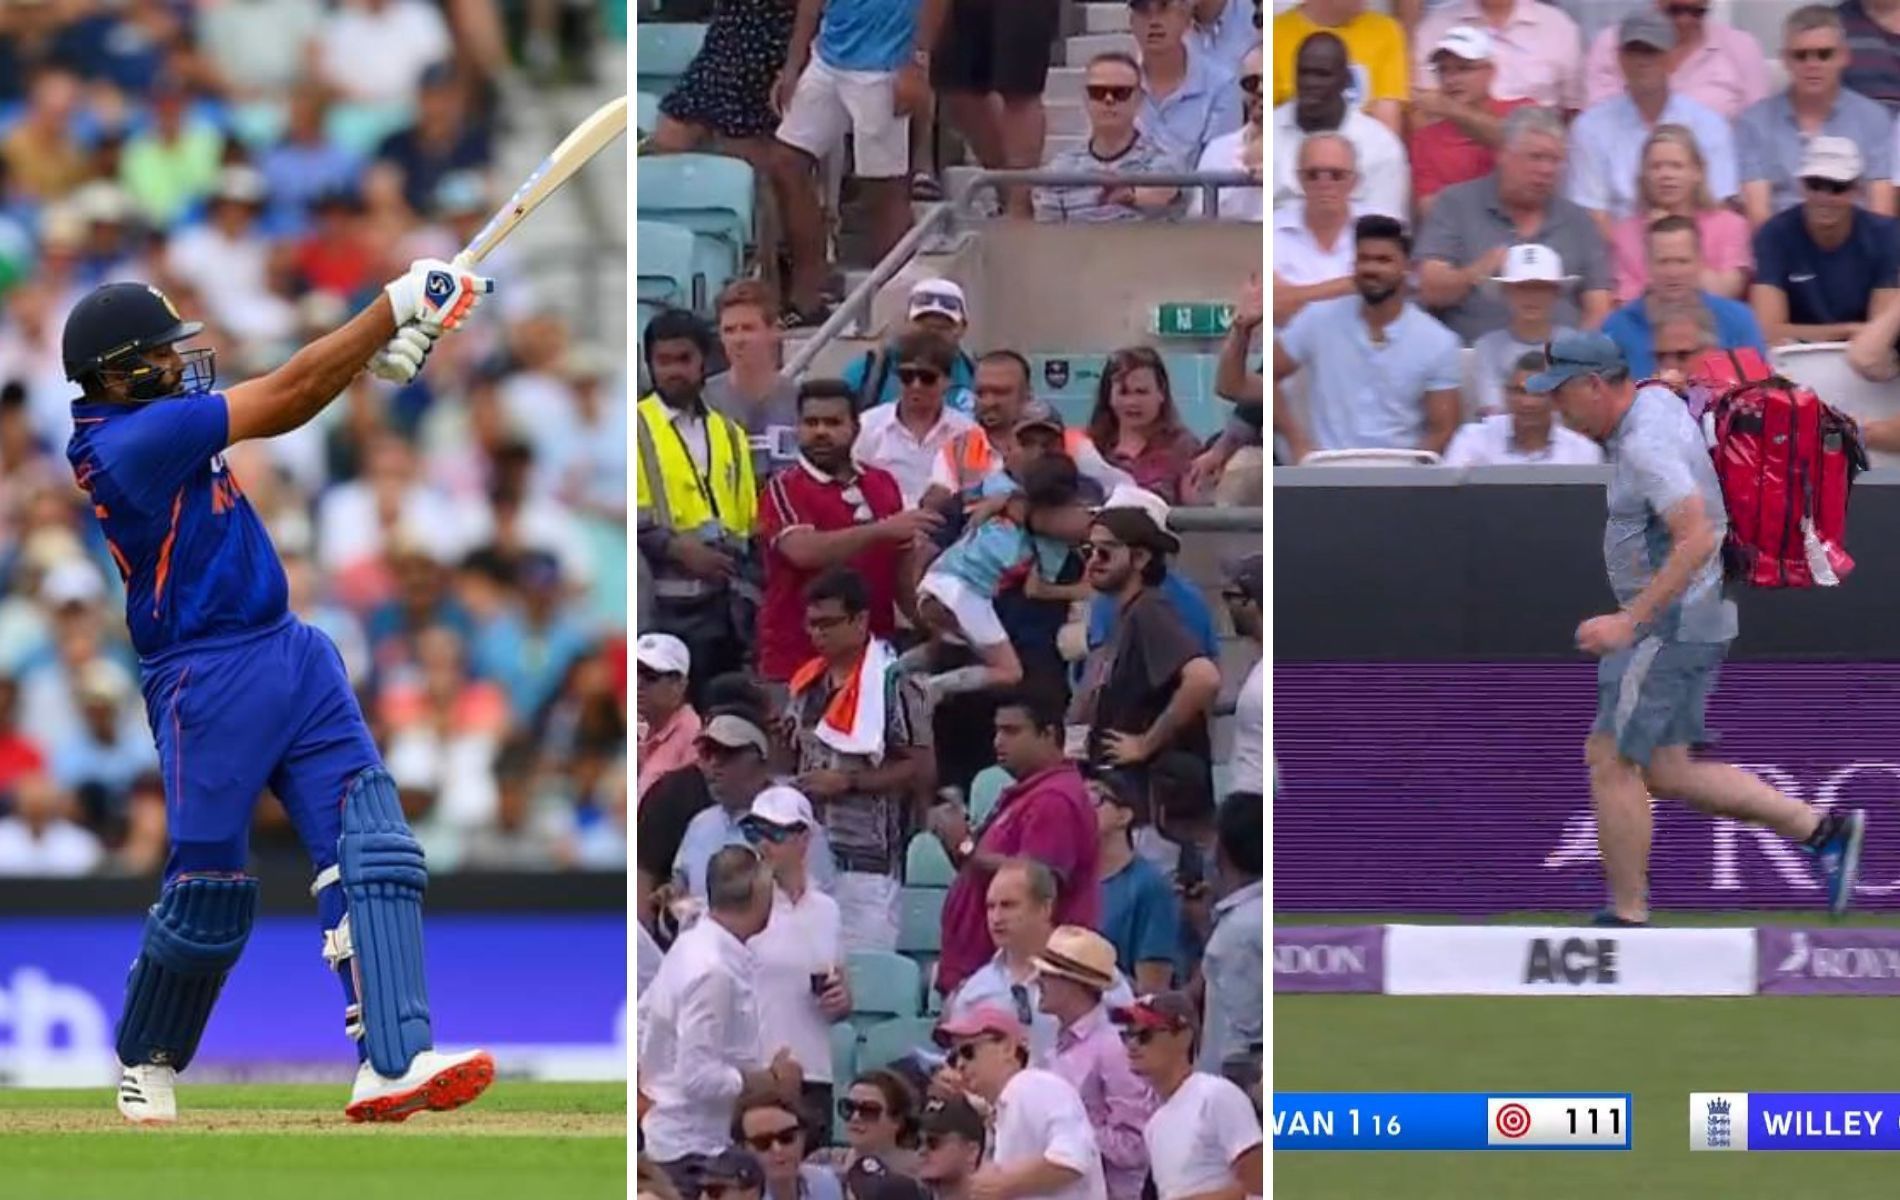 England sent their physios to check on the little girl. (Pics Sony Sports Network)